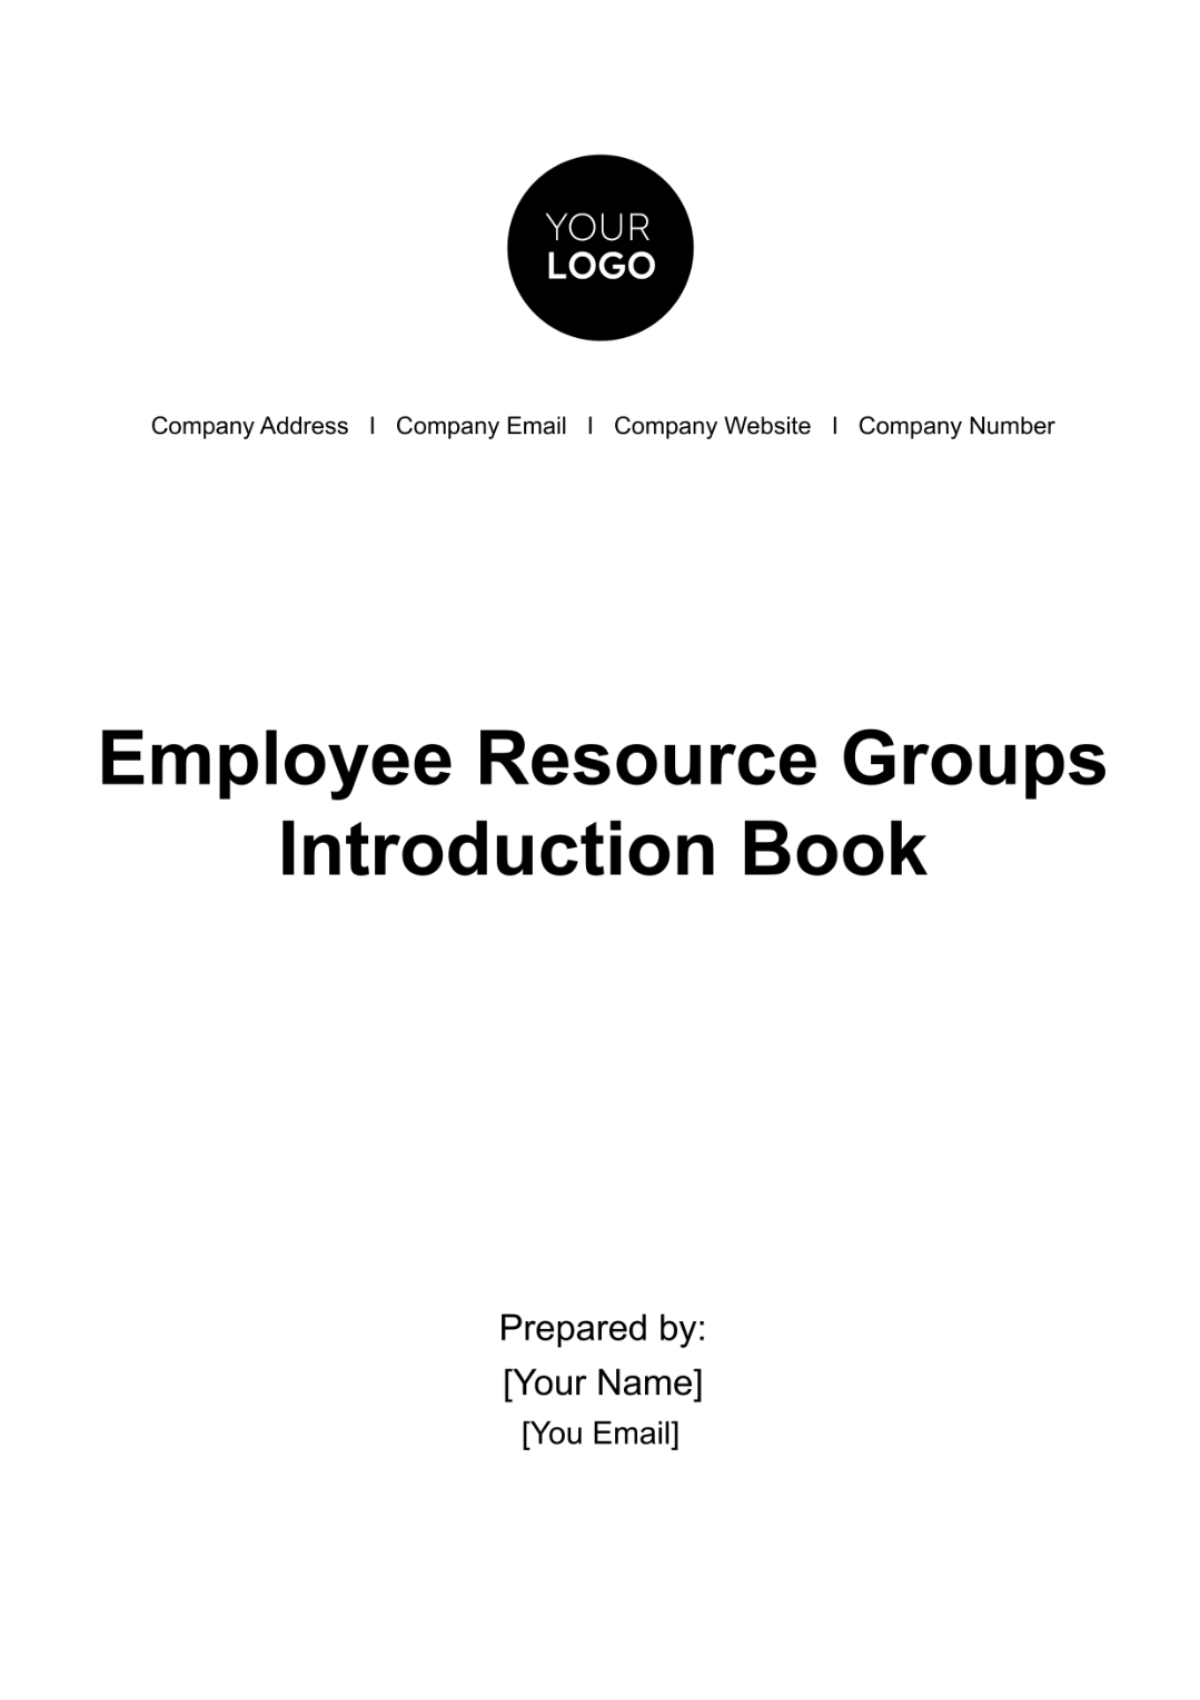 Employee Resource Groups Introduction Book HR Template